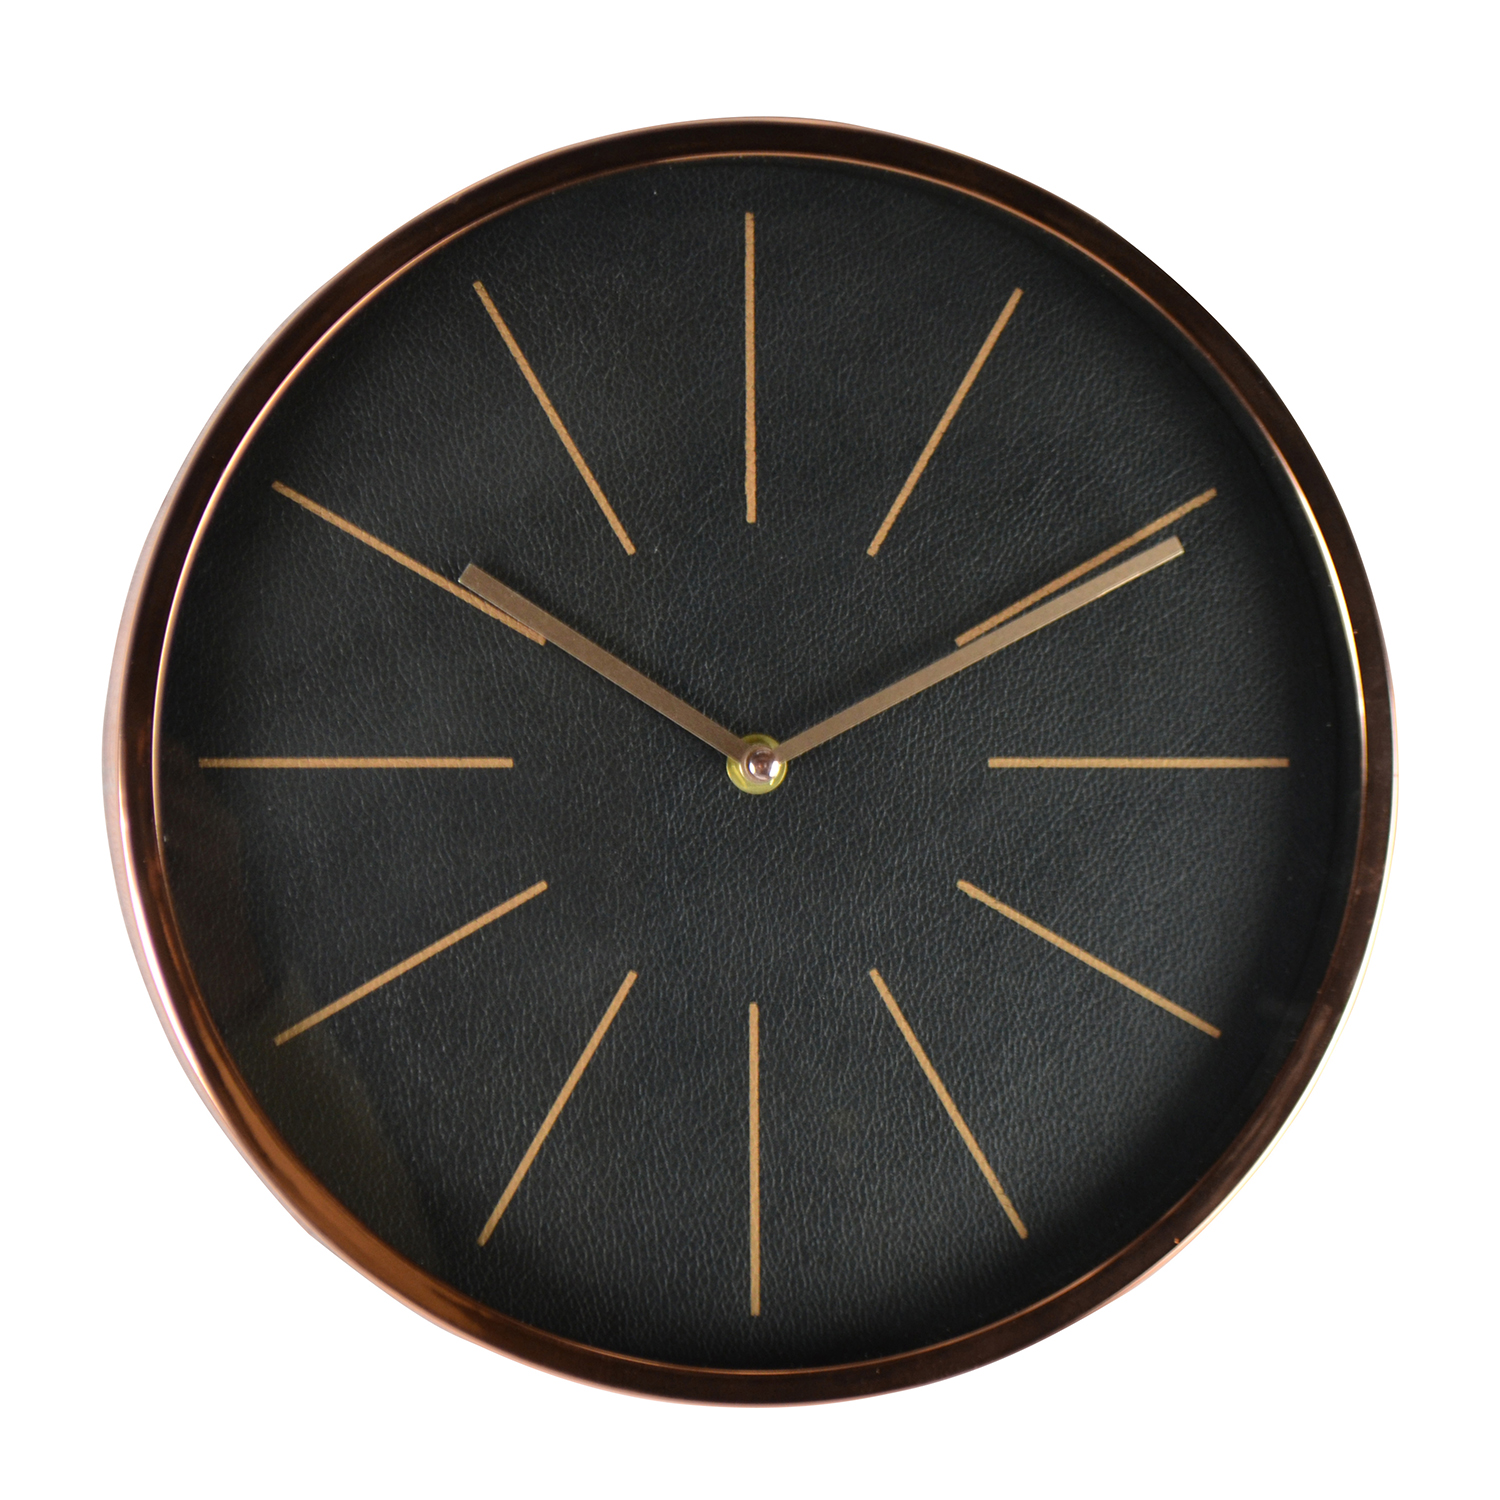 12" ROUND ROSE GOLD WALL CLOCK